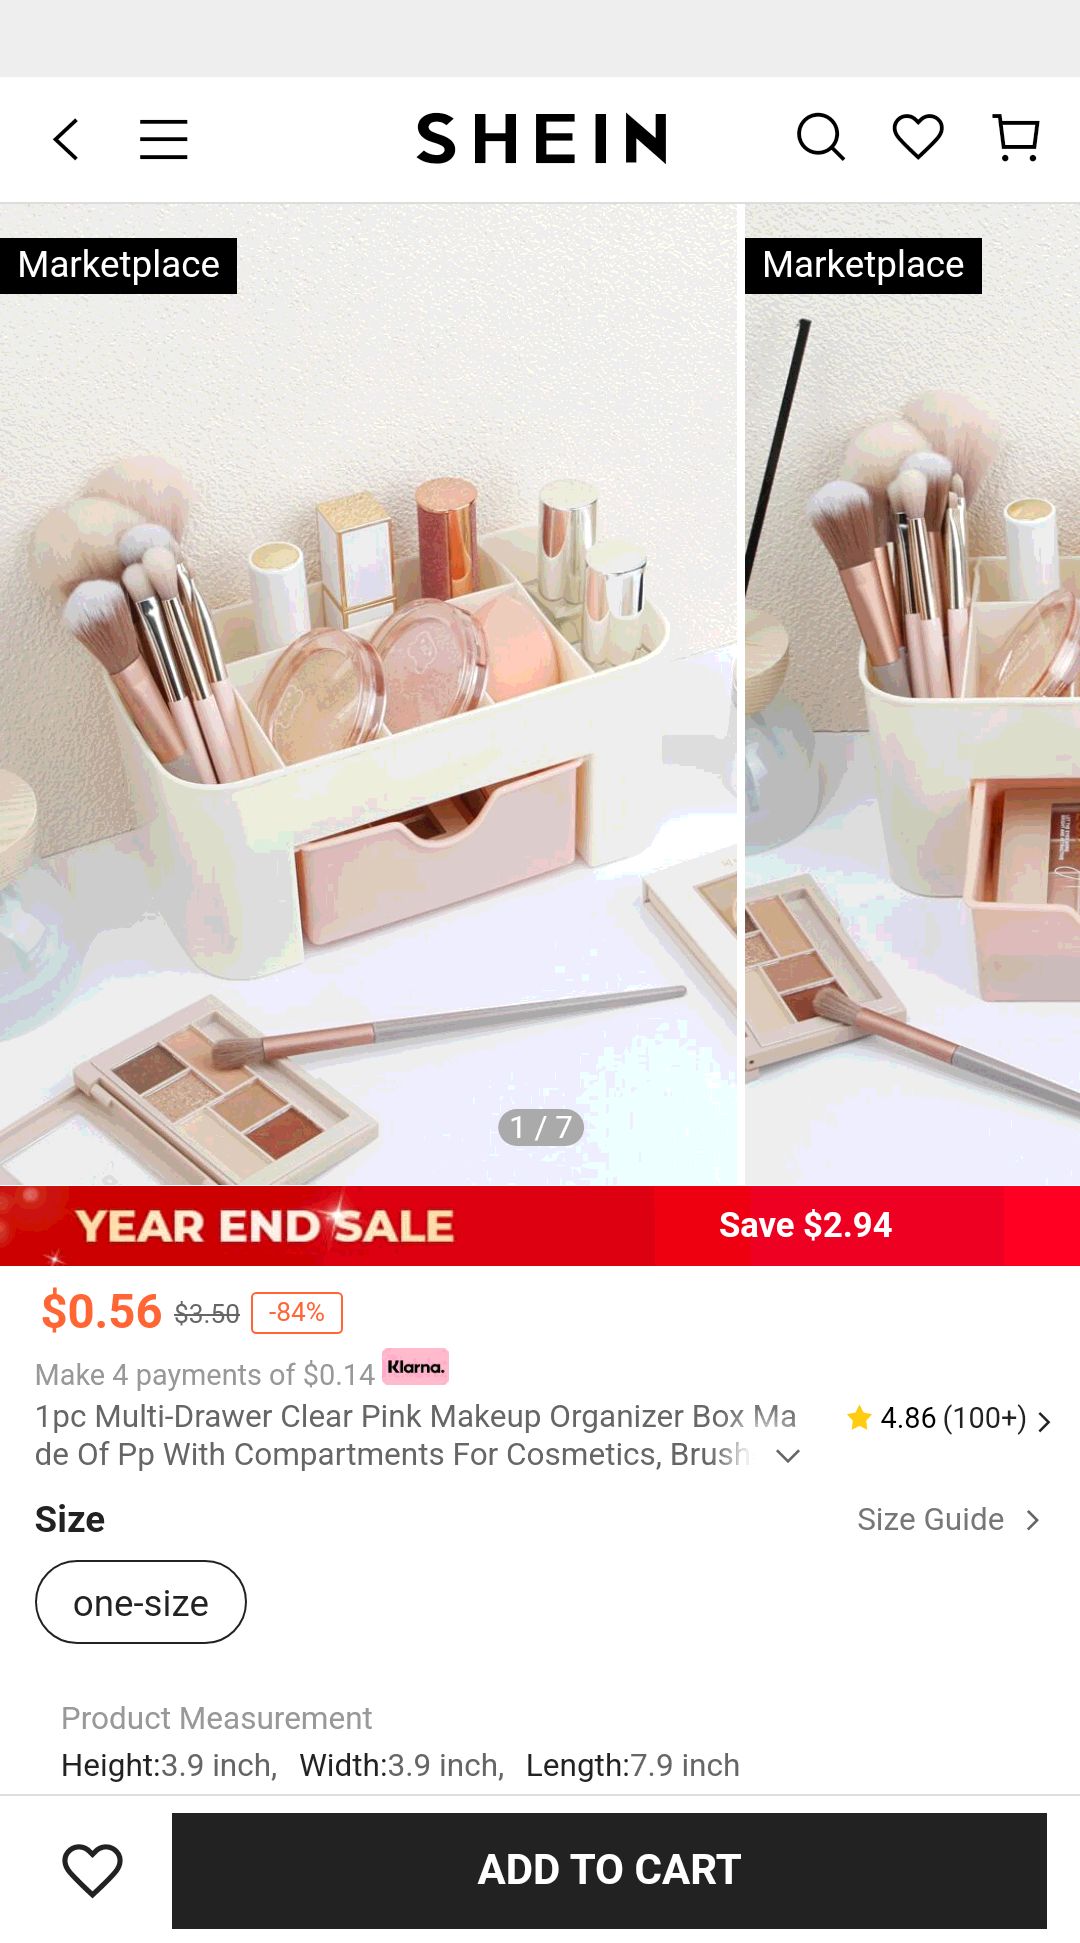 1pc Multi-drawer Clear Pink Makeup Organizer Box Made Of Pp With Compartments For Cosmetics, Brushes, Sponge And Jewelry, Perfect For Home/desktop Use By Women | SHEIN USA